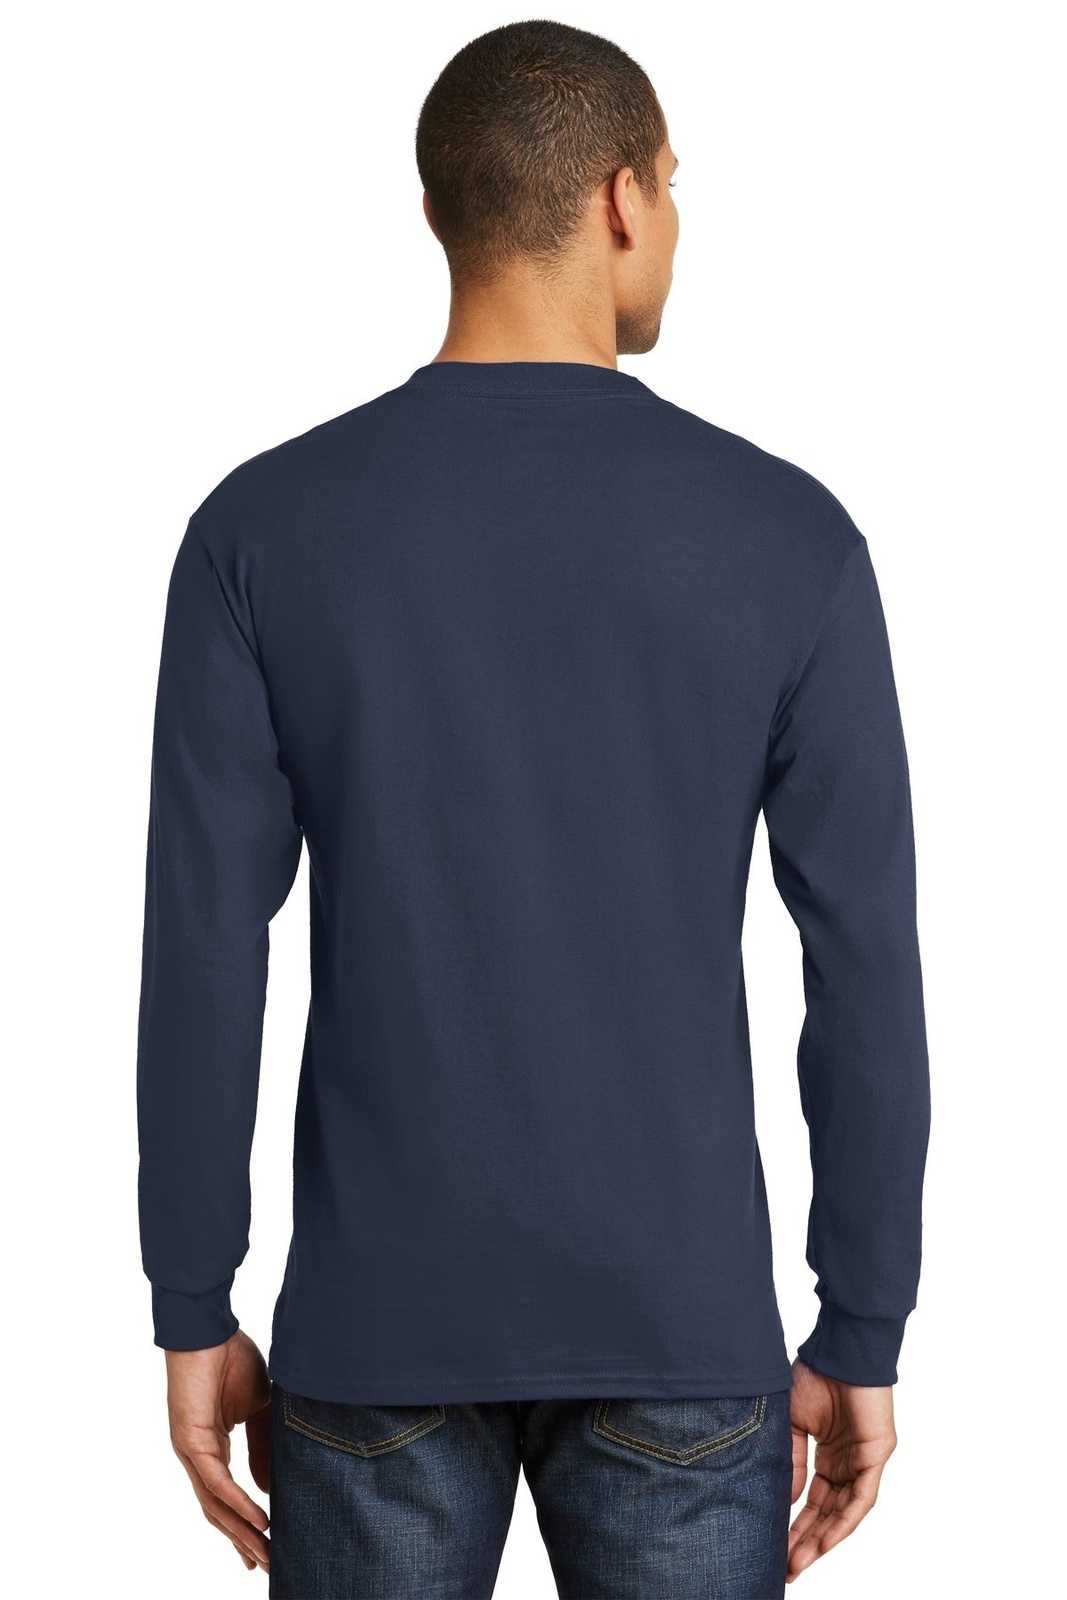 Hanes 5186 Beefy-T 100% Cotton Long Sleeve T-Shirt - Navy - HIT a Double